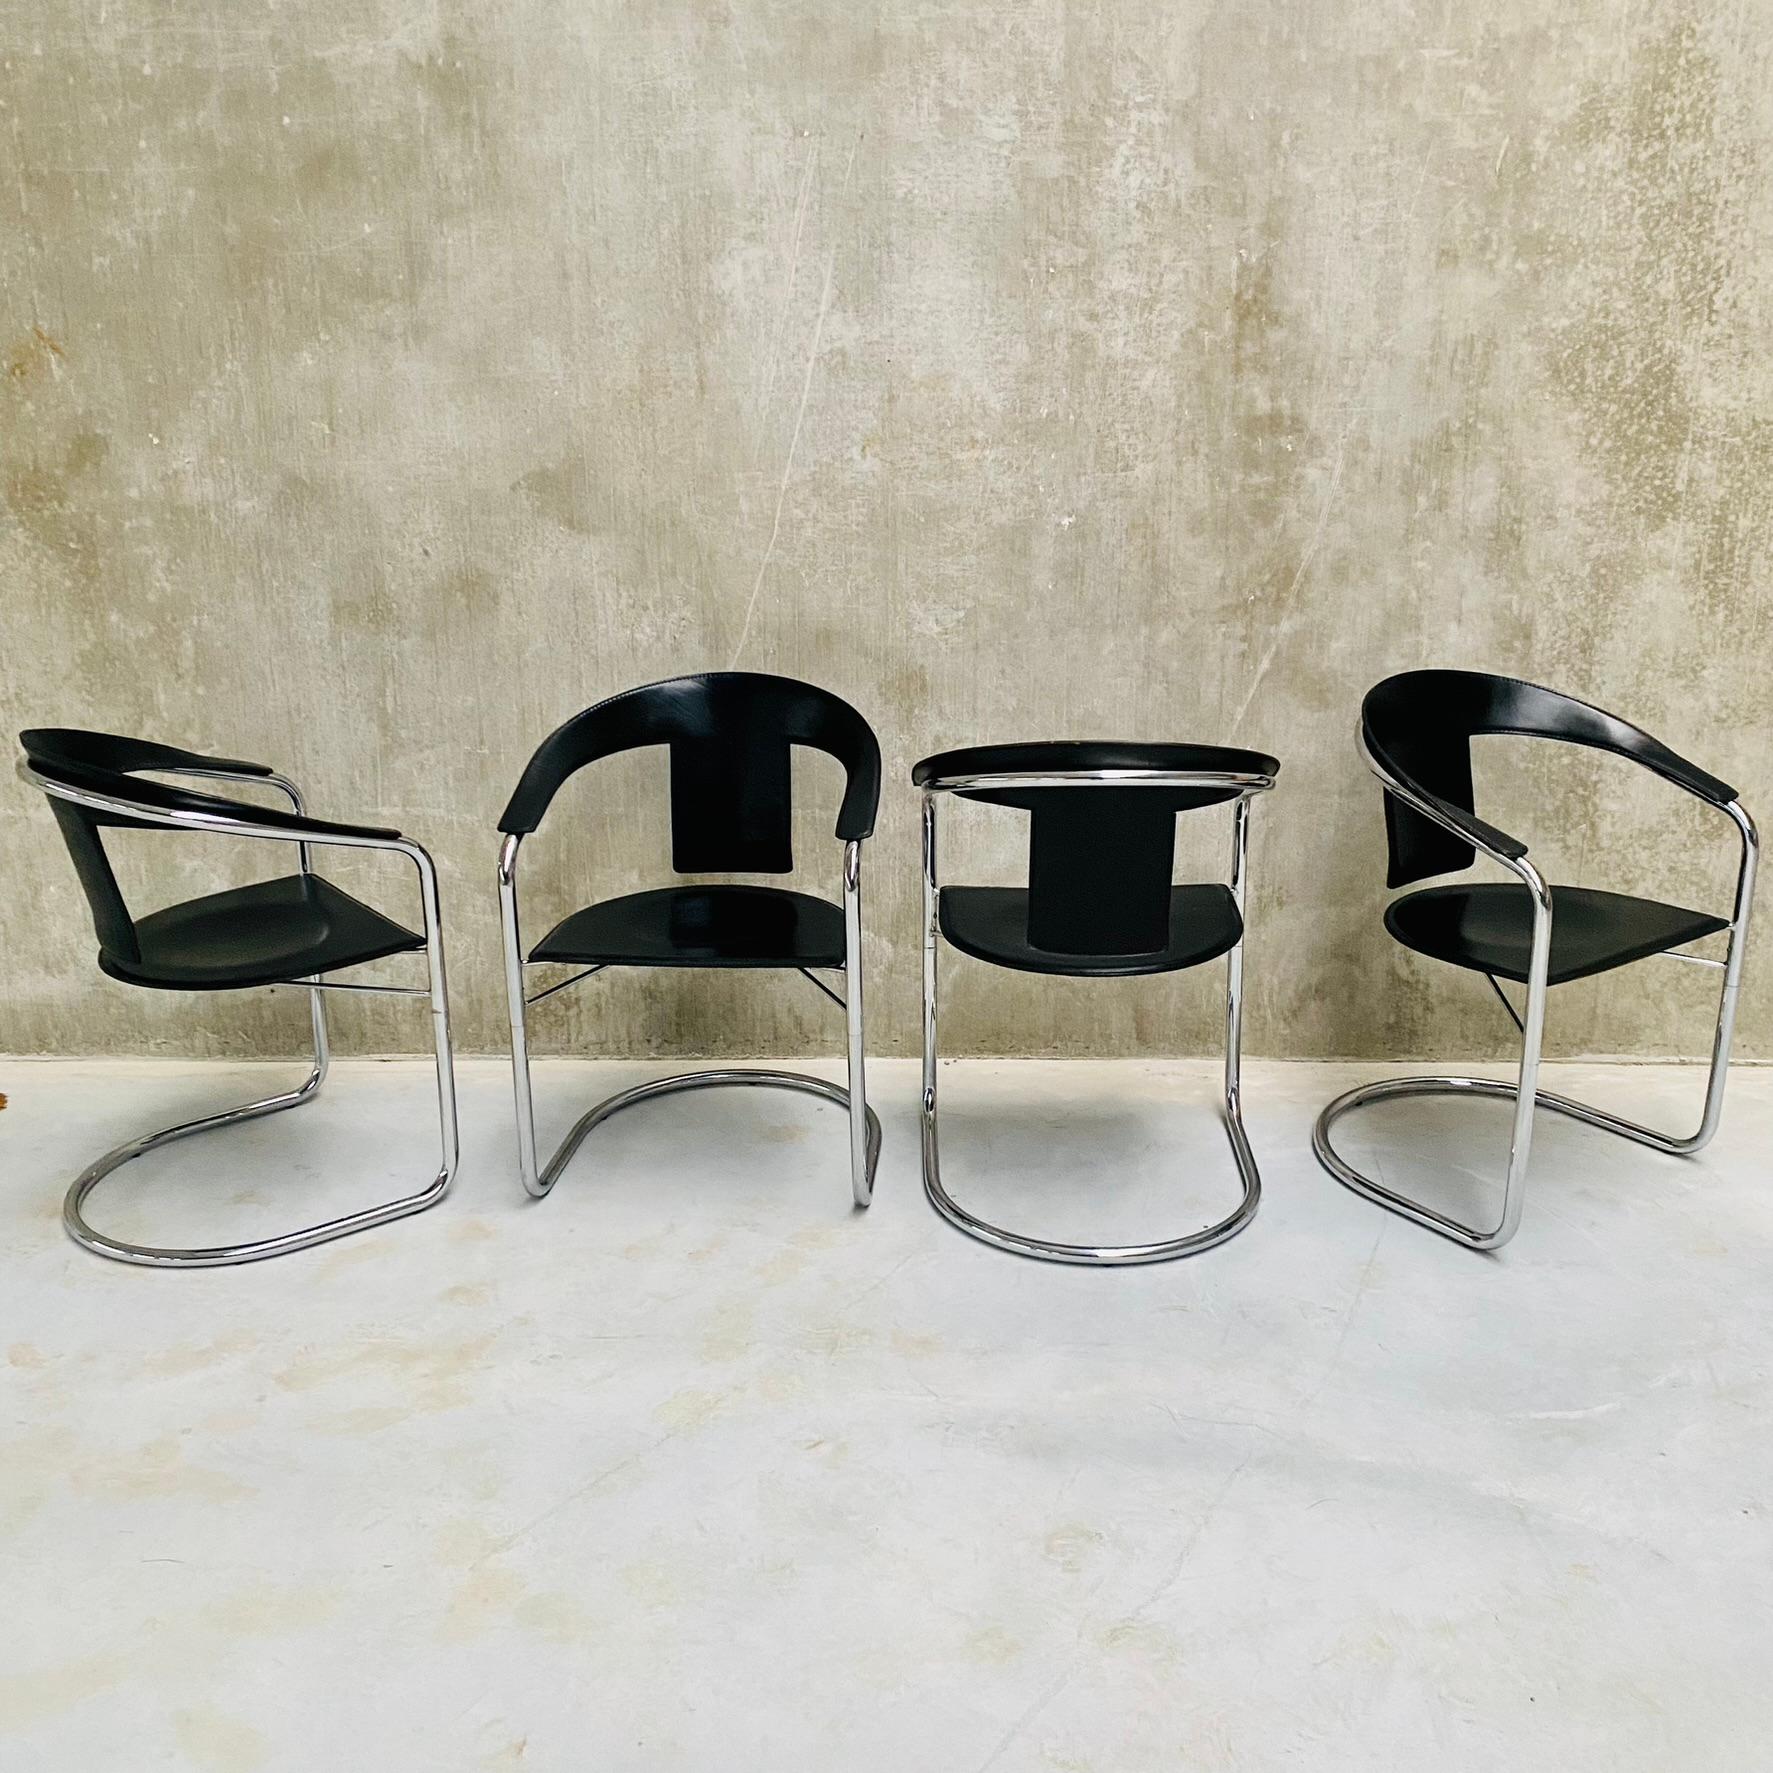 Modern 4 x Lo Studio Black Saddle Leather Dining Chairs by A. Rizzatto Italy 1980